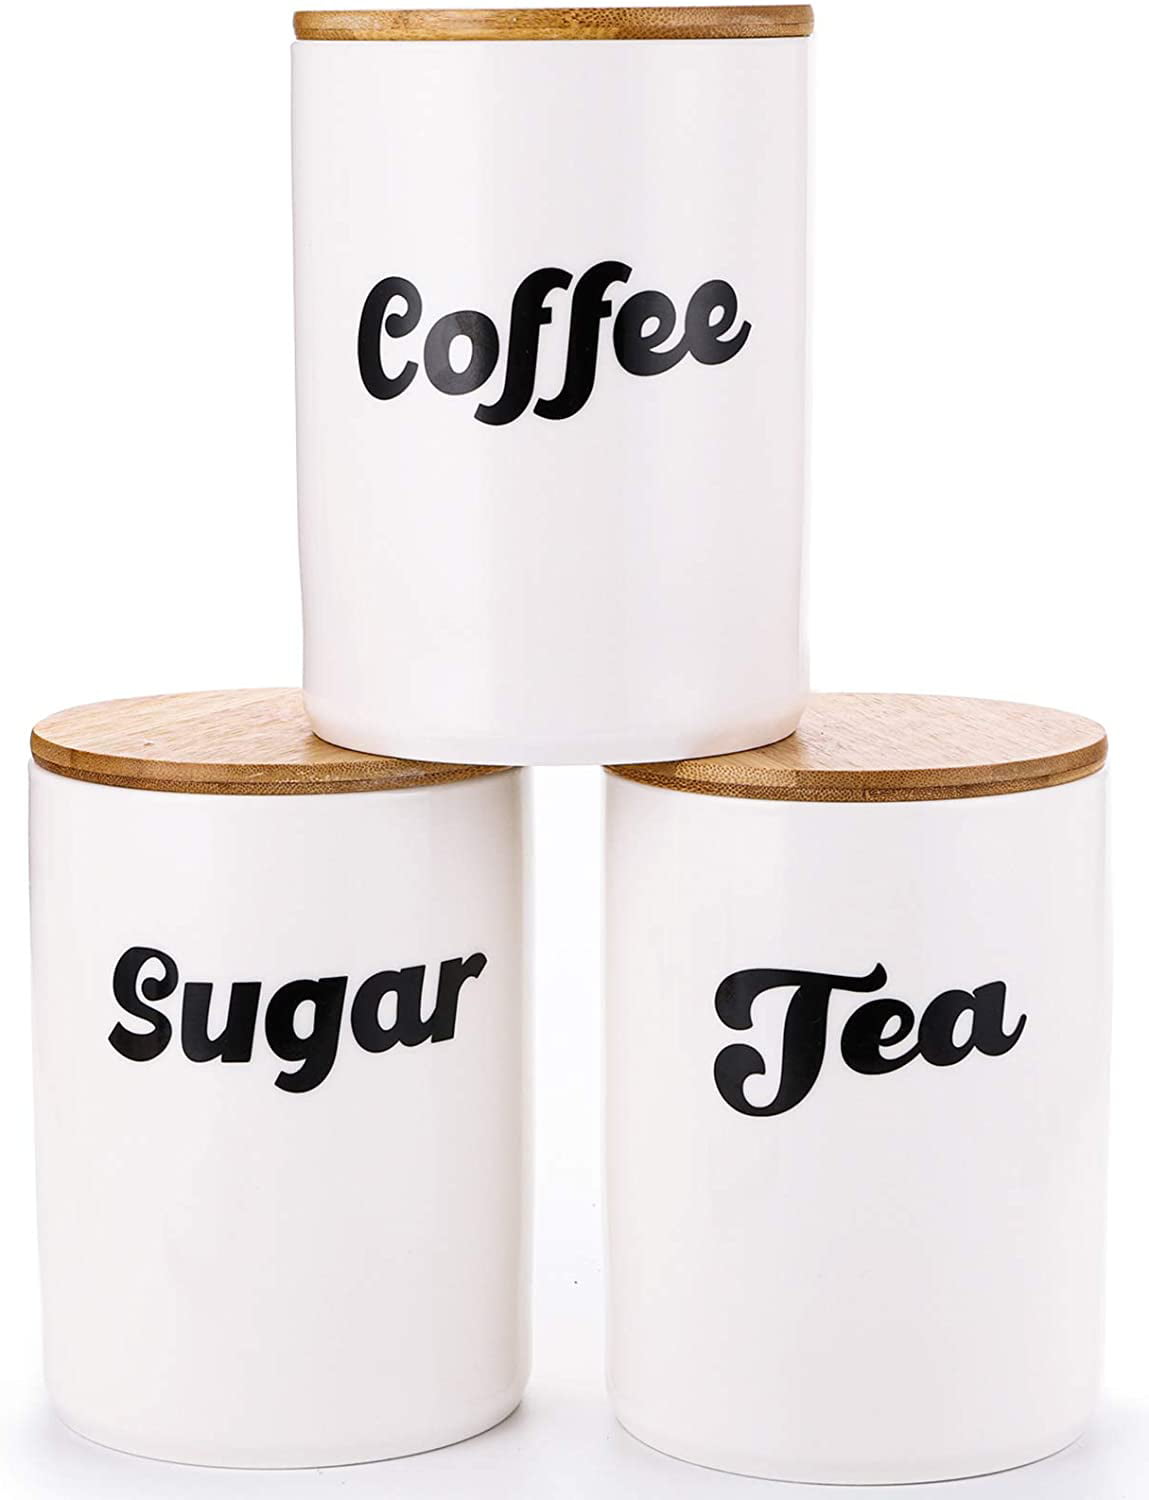 Sugar and Coffee Air Tight Jars Cannisters Storage Ceramic Round Set of 3 Tea